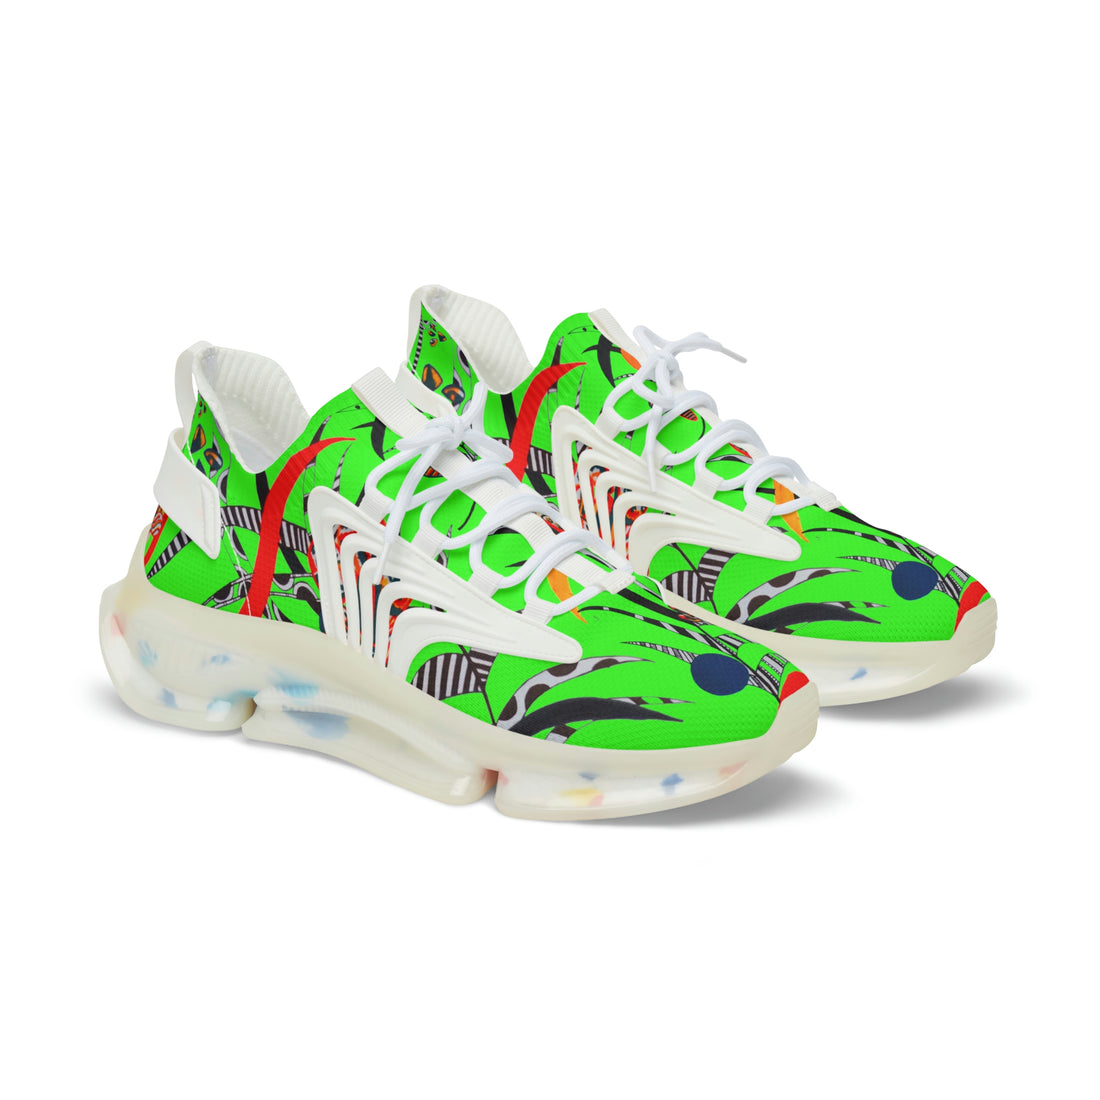 neon green men's floral and animal print mesh knit sneakers